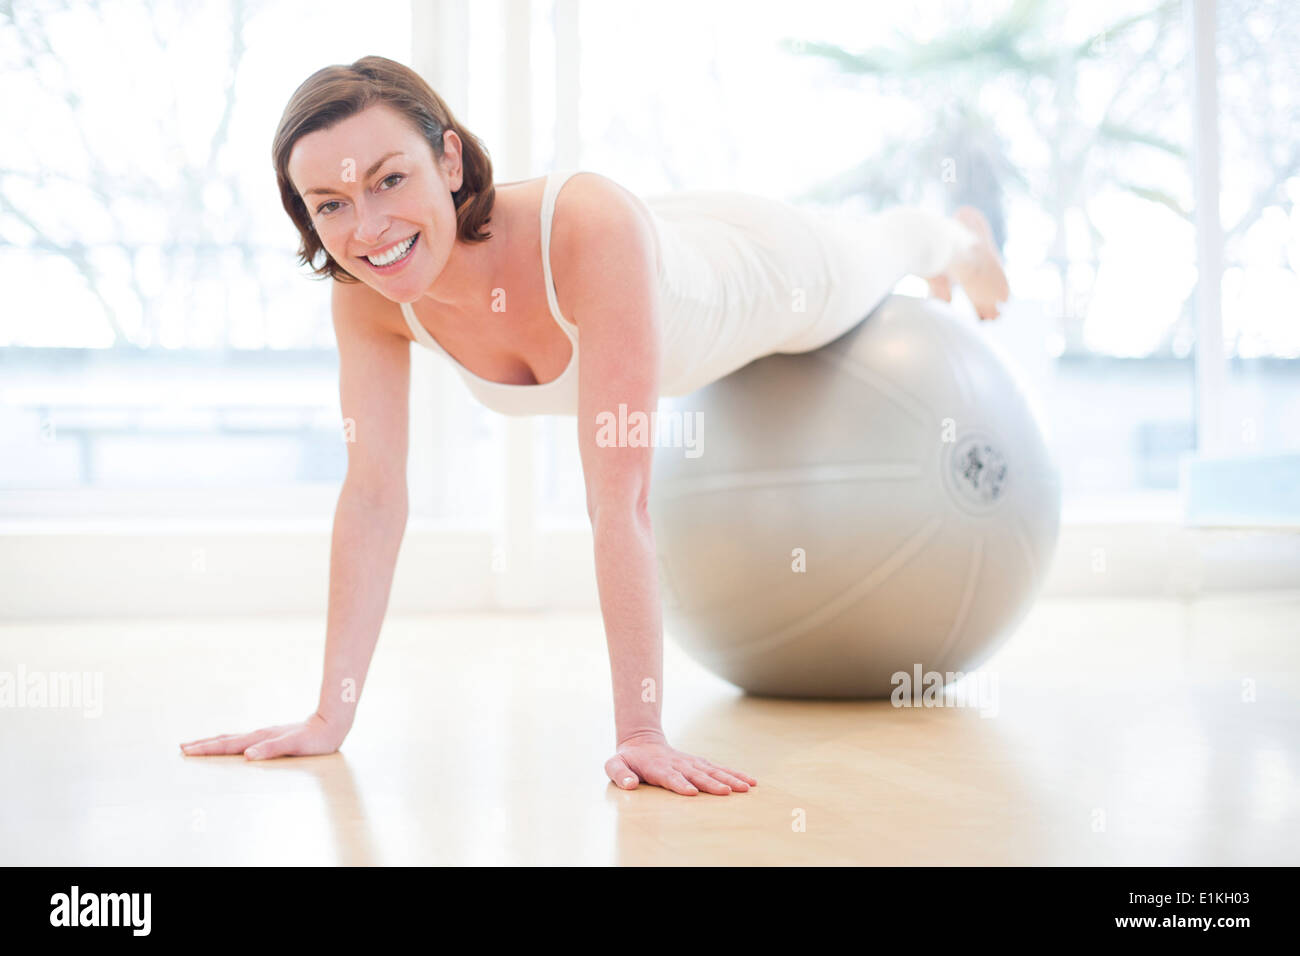 MODEL RELEASED Woman balancing on an exercise ball. Stock Photo